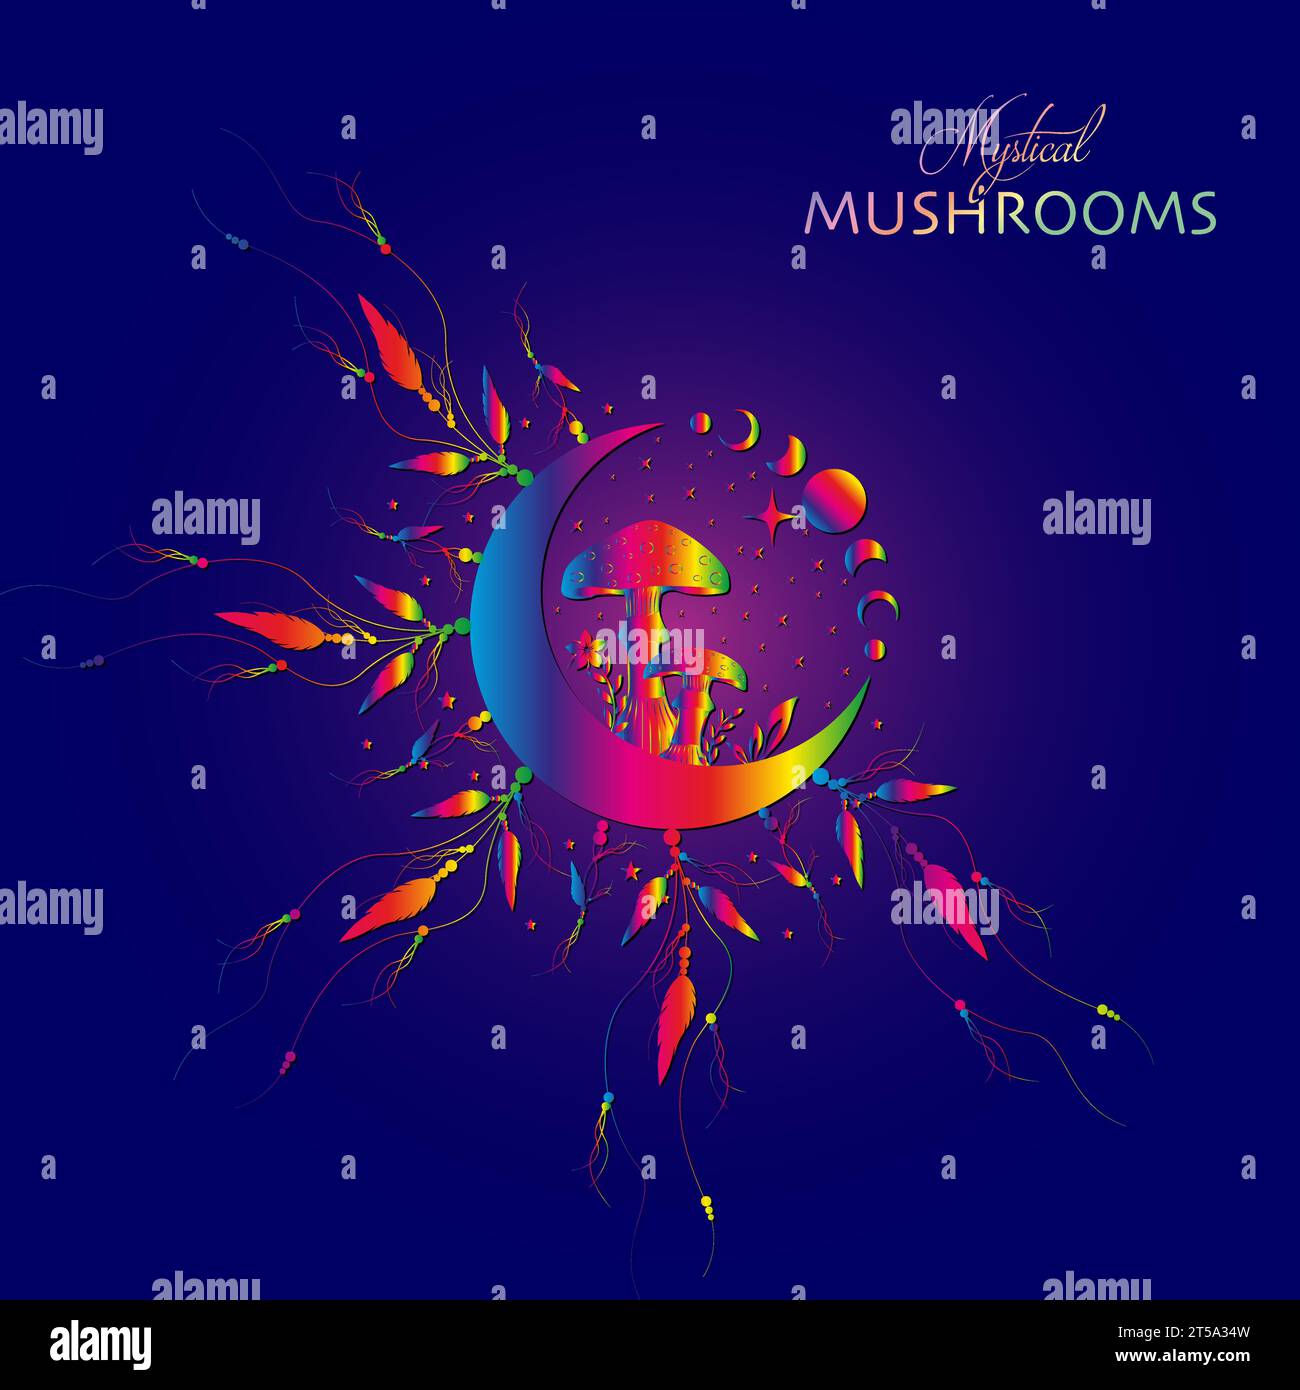 Shamanic magic mushrooms, Mystical Amanita Muscaria with moon phases and stars. Witchcraft  Psychedelic Dreamcatcher symbol, witchy esoteric fungus Stock Vector